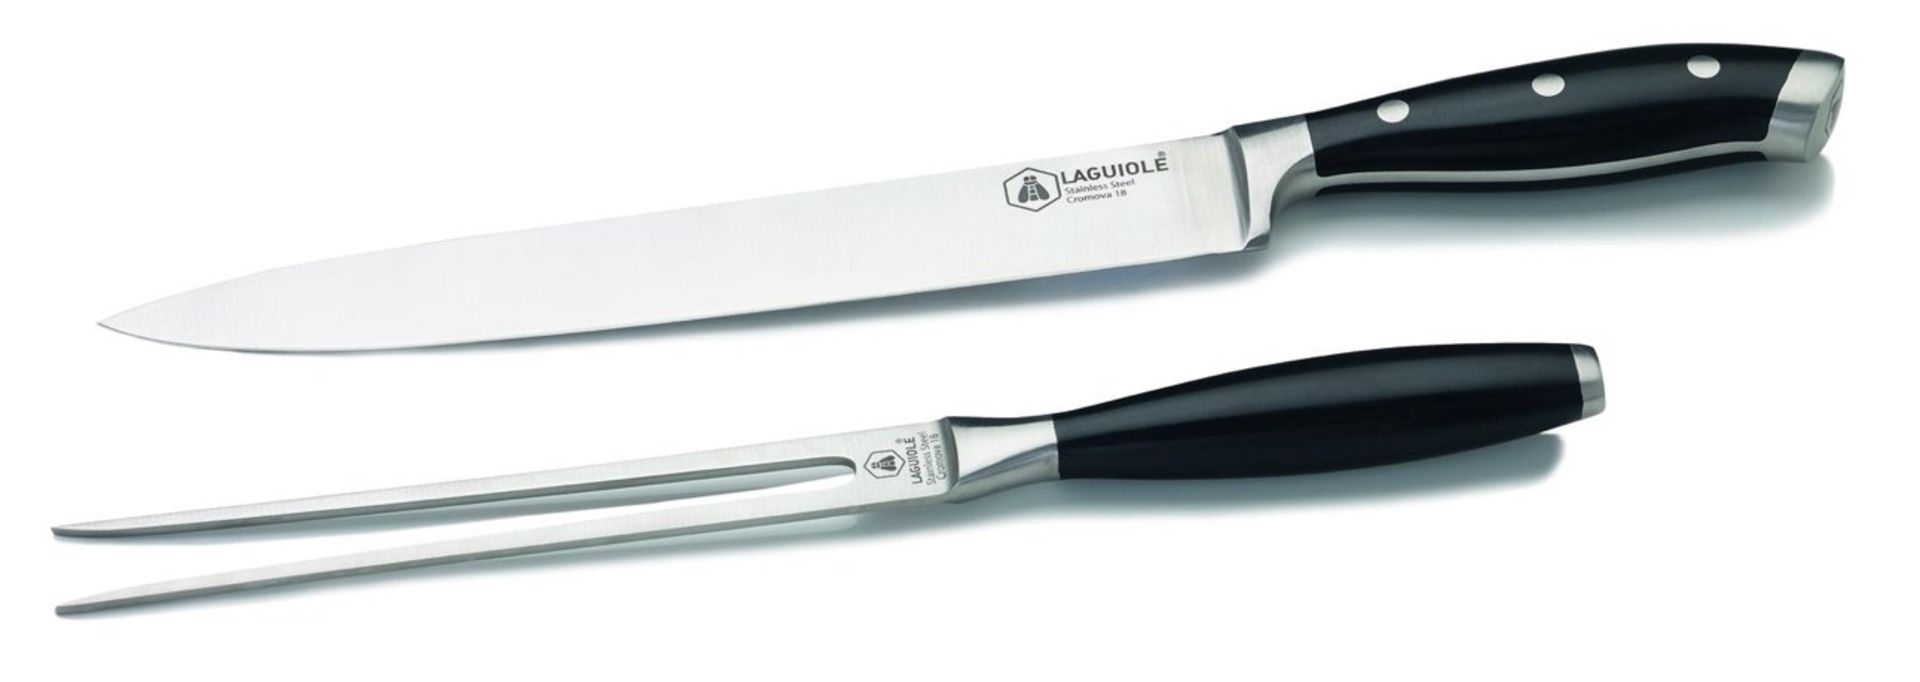 V Brand New Laguiole Carving Set with Carving Knife and Meat Fork - Amazon price £24.99